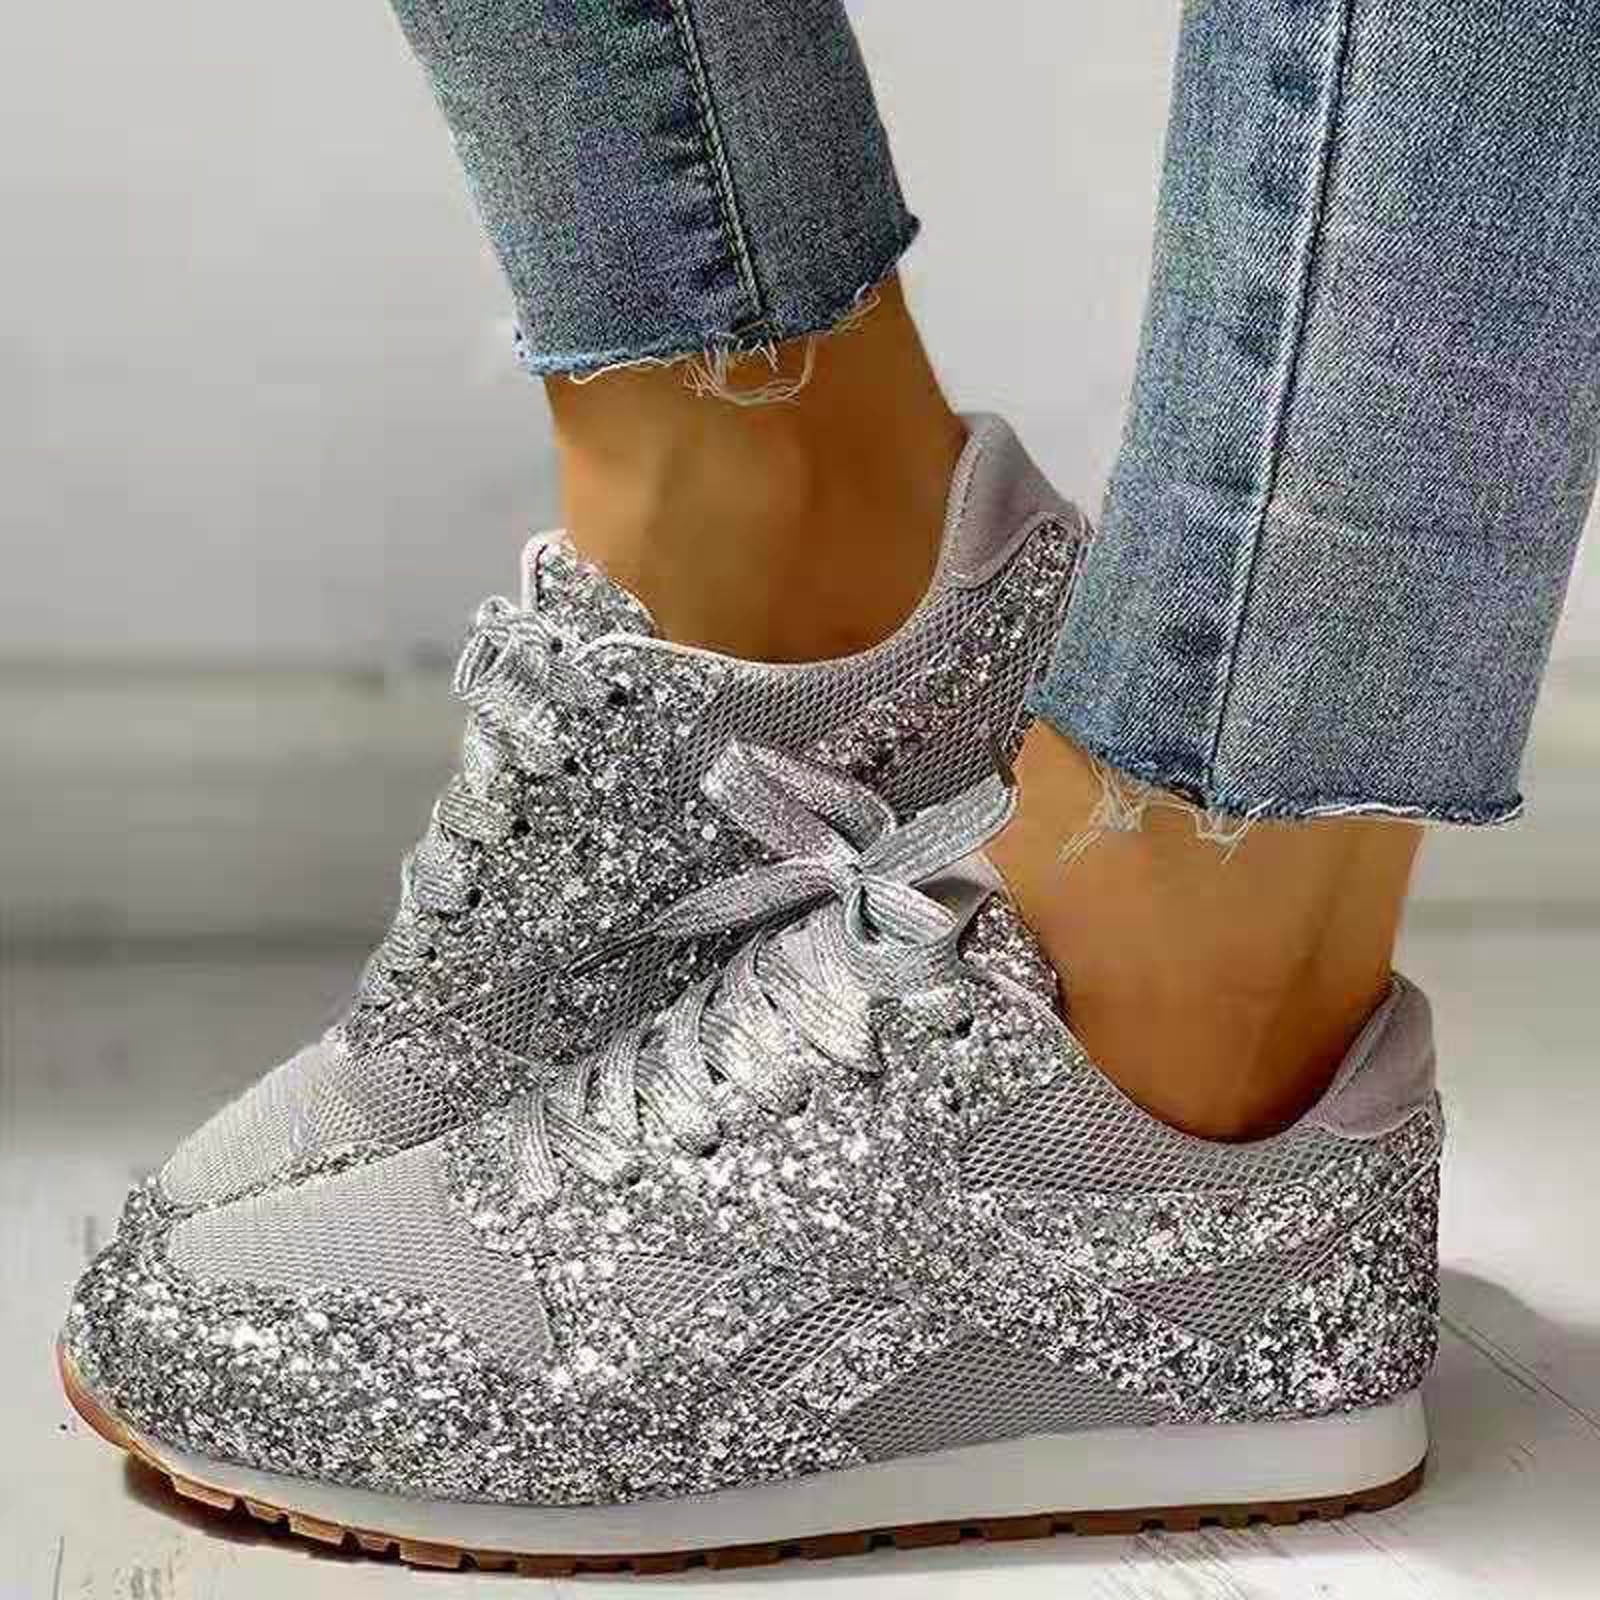 EQWLJWE Women's Fashion Casual Breathable Crystal Bling Lace Up Sport ...